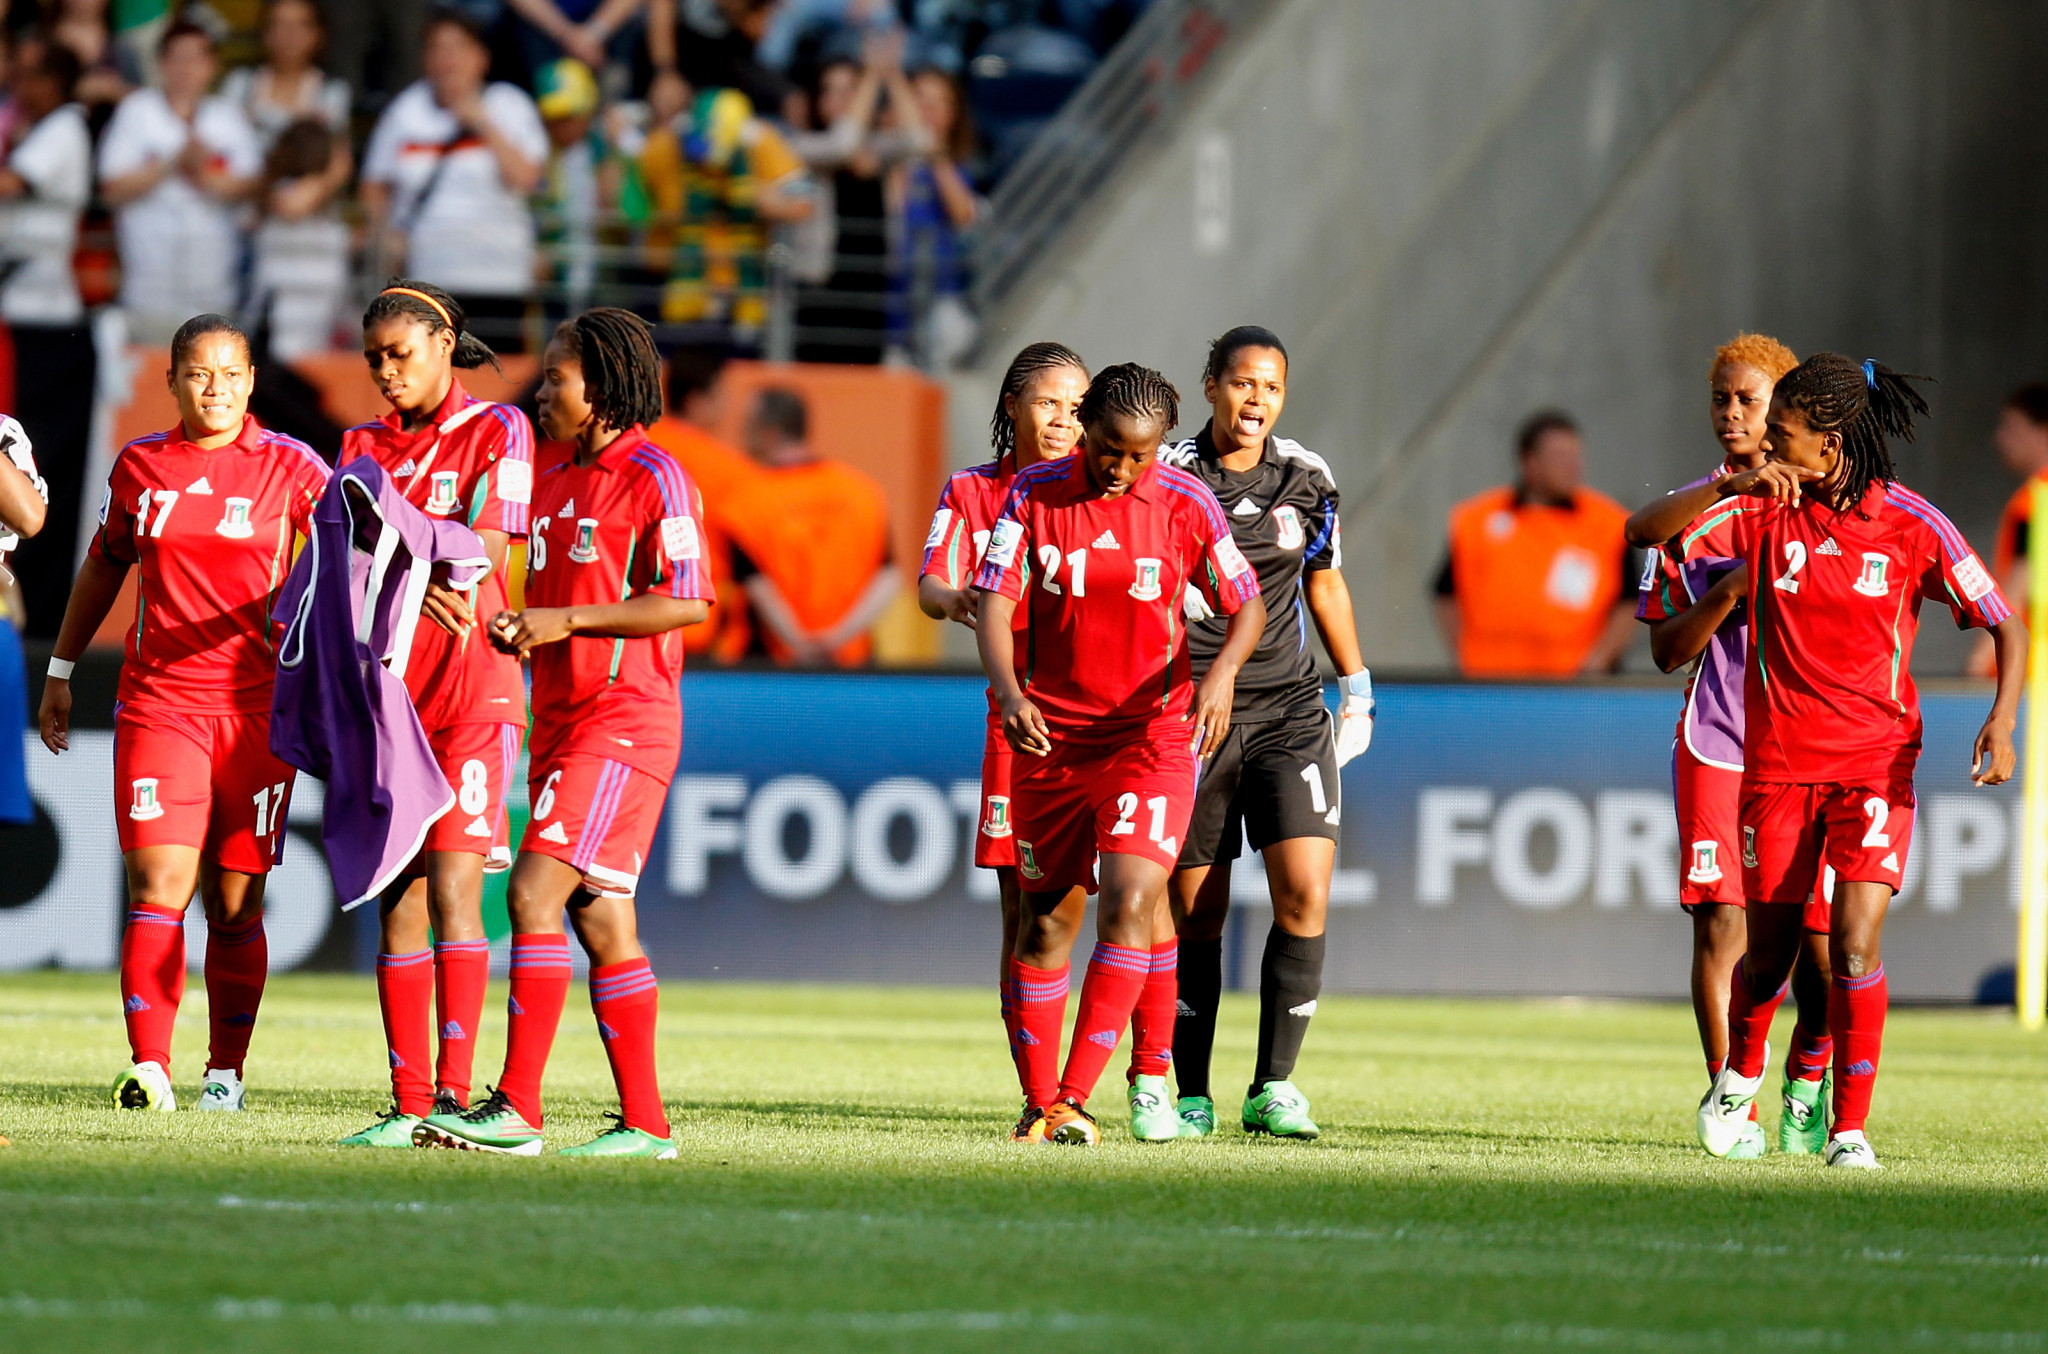 Kenya to launch CAS appeal after Equatorial Guinea reinstated to Women's Africa Cup of Nations